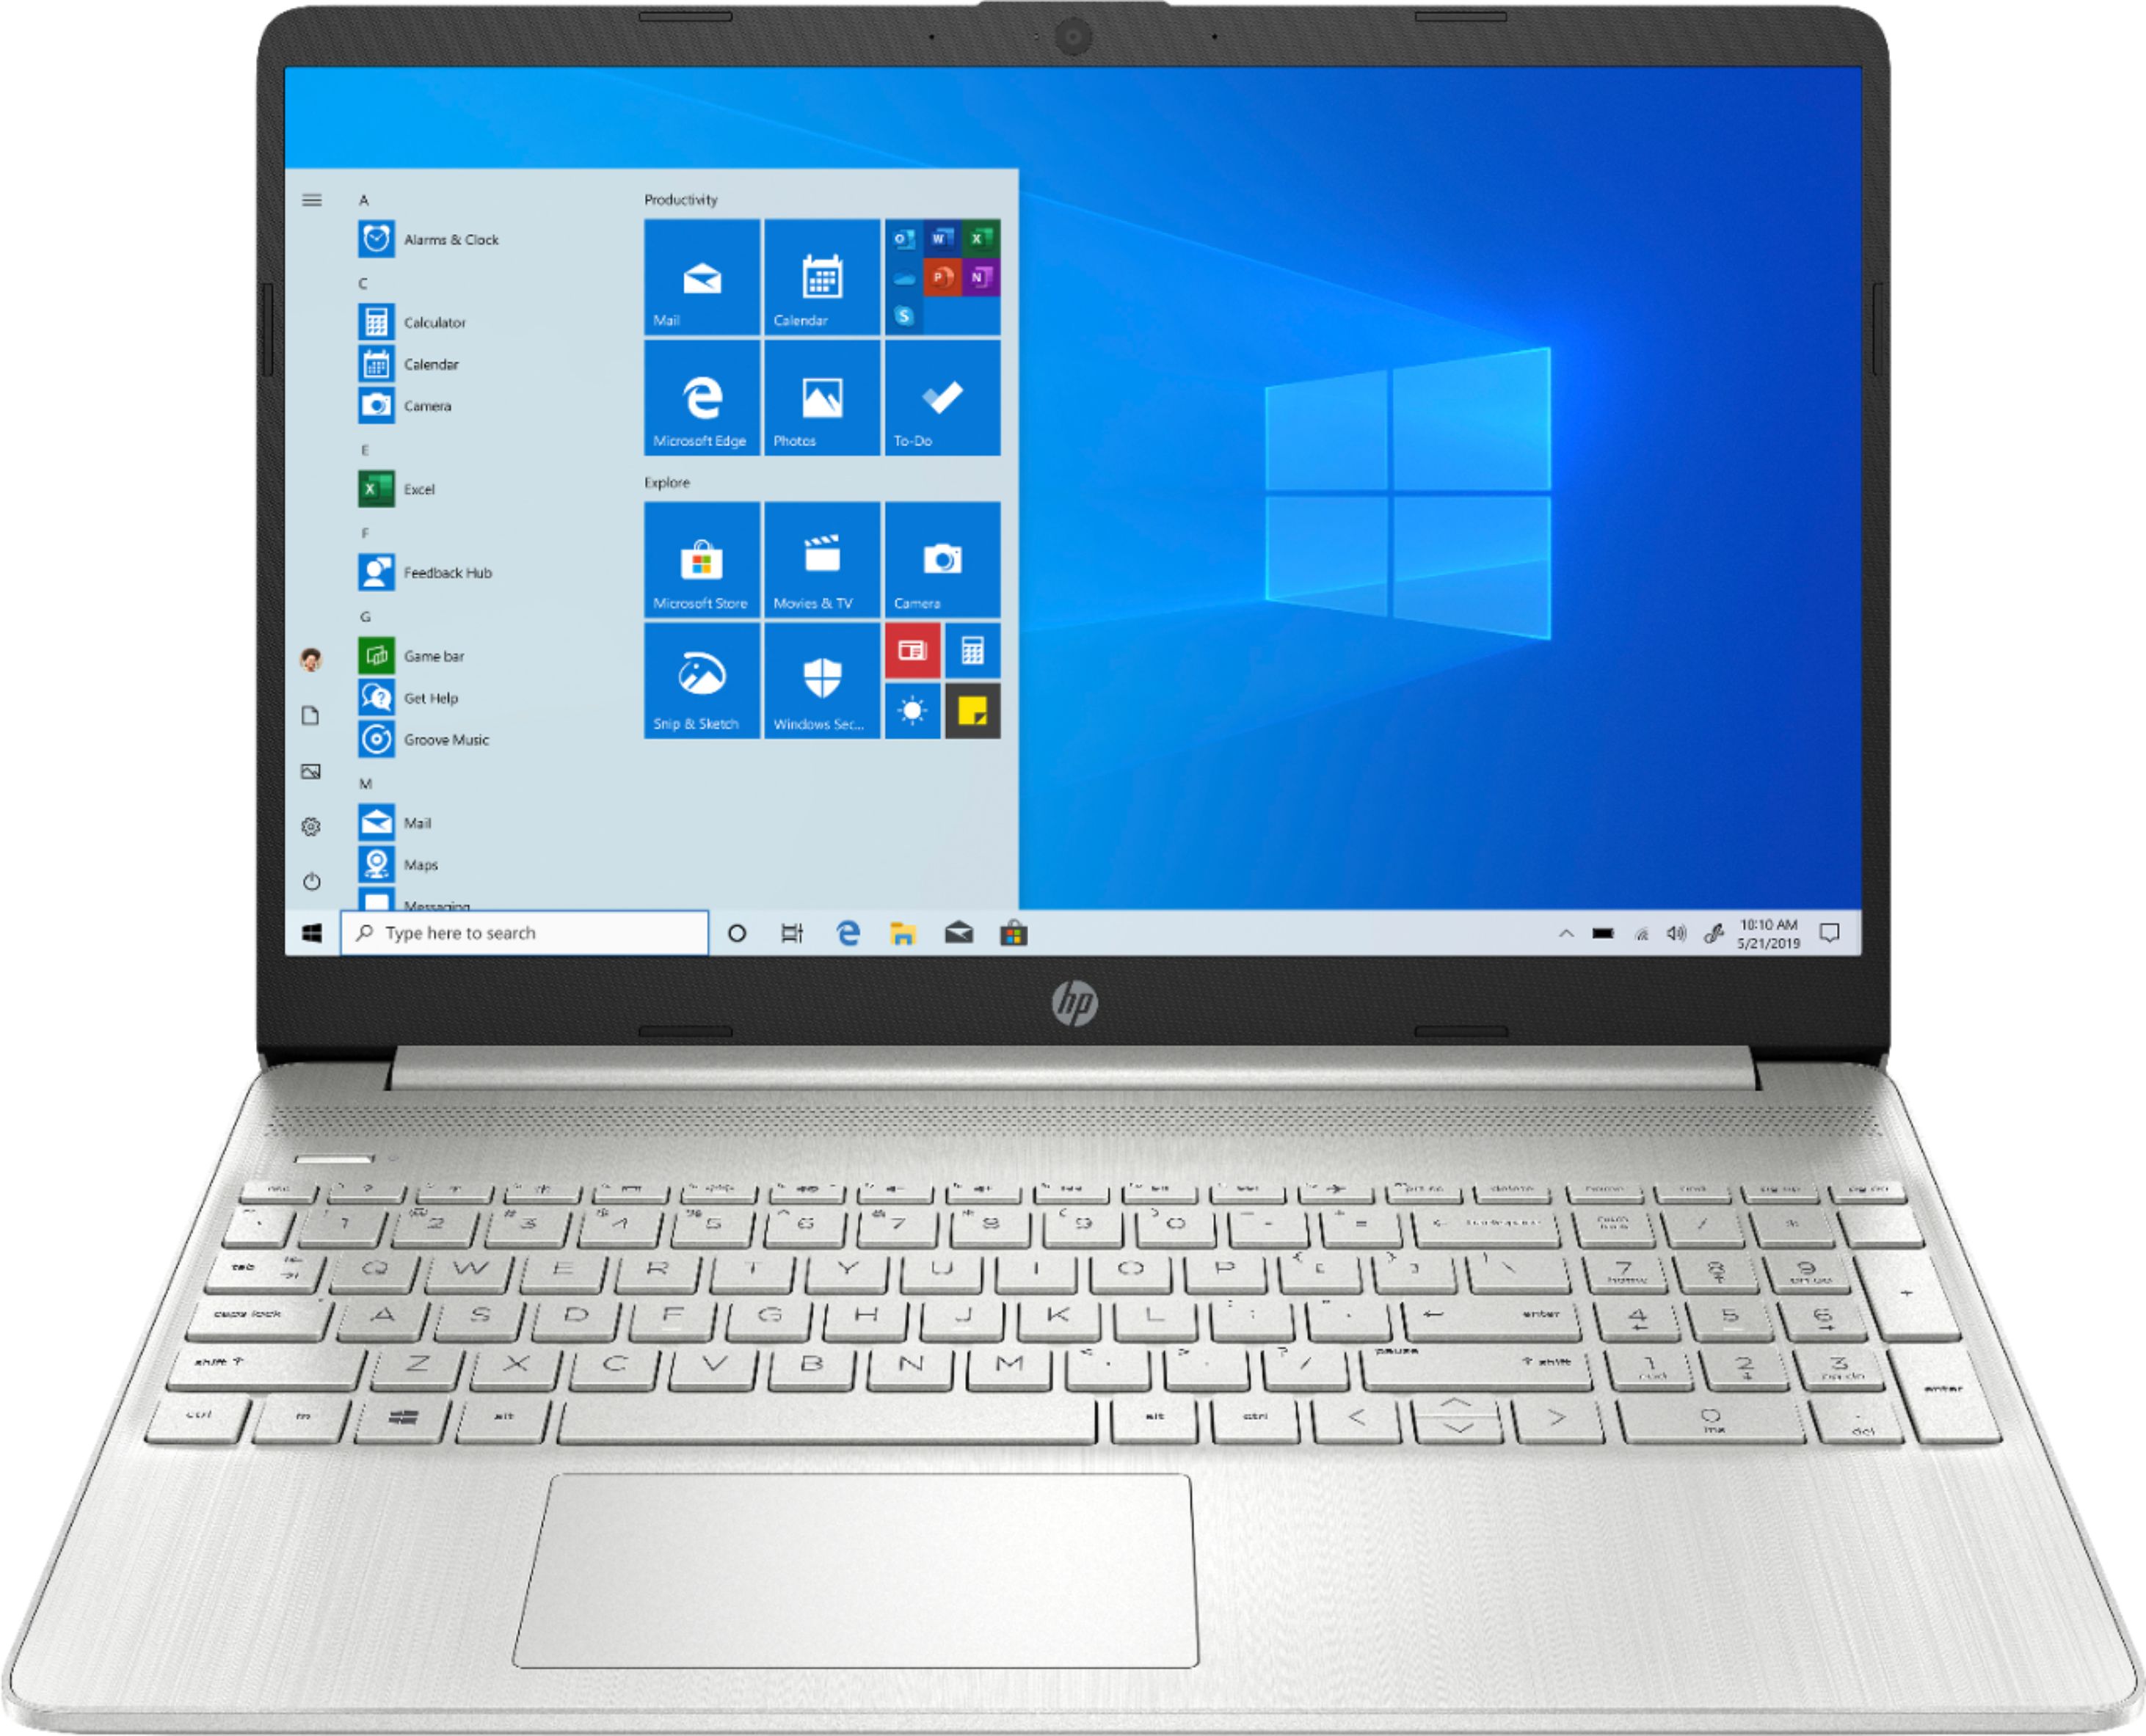 HP - 15.6 inch Touch-Screen Laptop - AMD Ryzen 5 - 12GB Memory - 256GB SSD - Natural Silver - 9.99